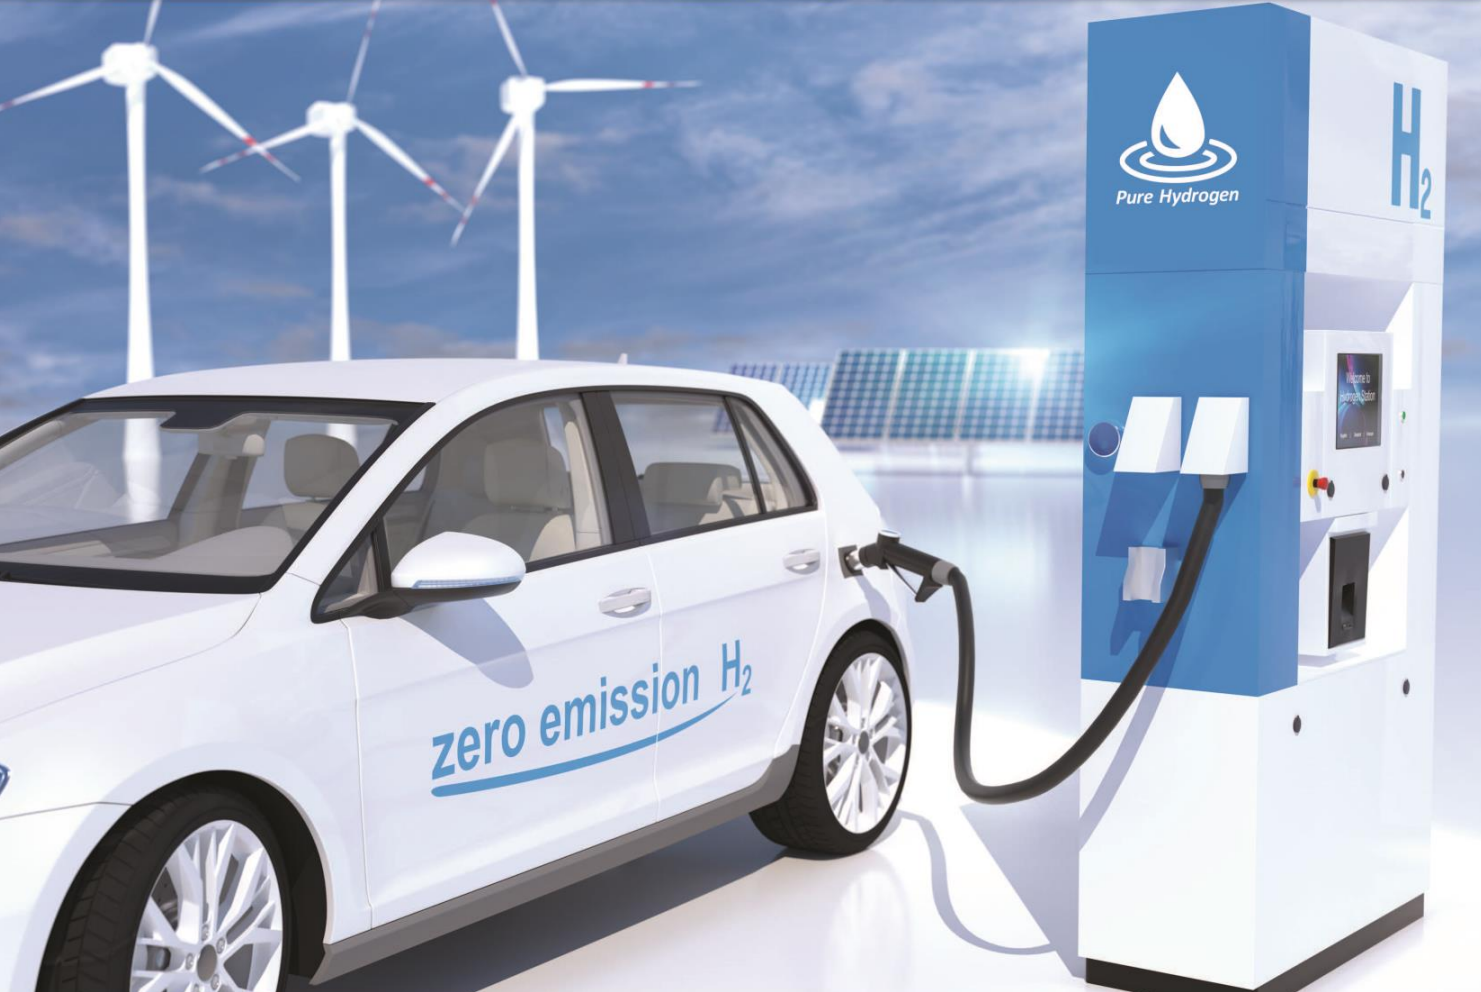 (Source: Pure Hydrogen) A mock-up of a Pure Hydrogen consumer FCEV refuelling station 